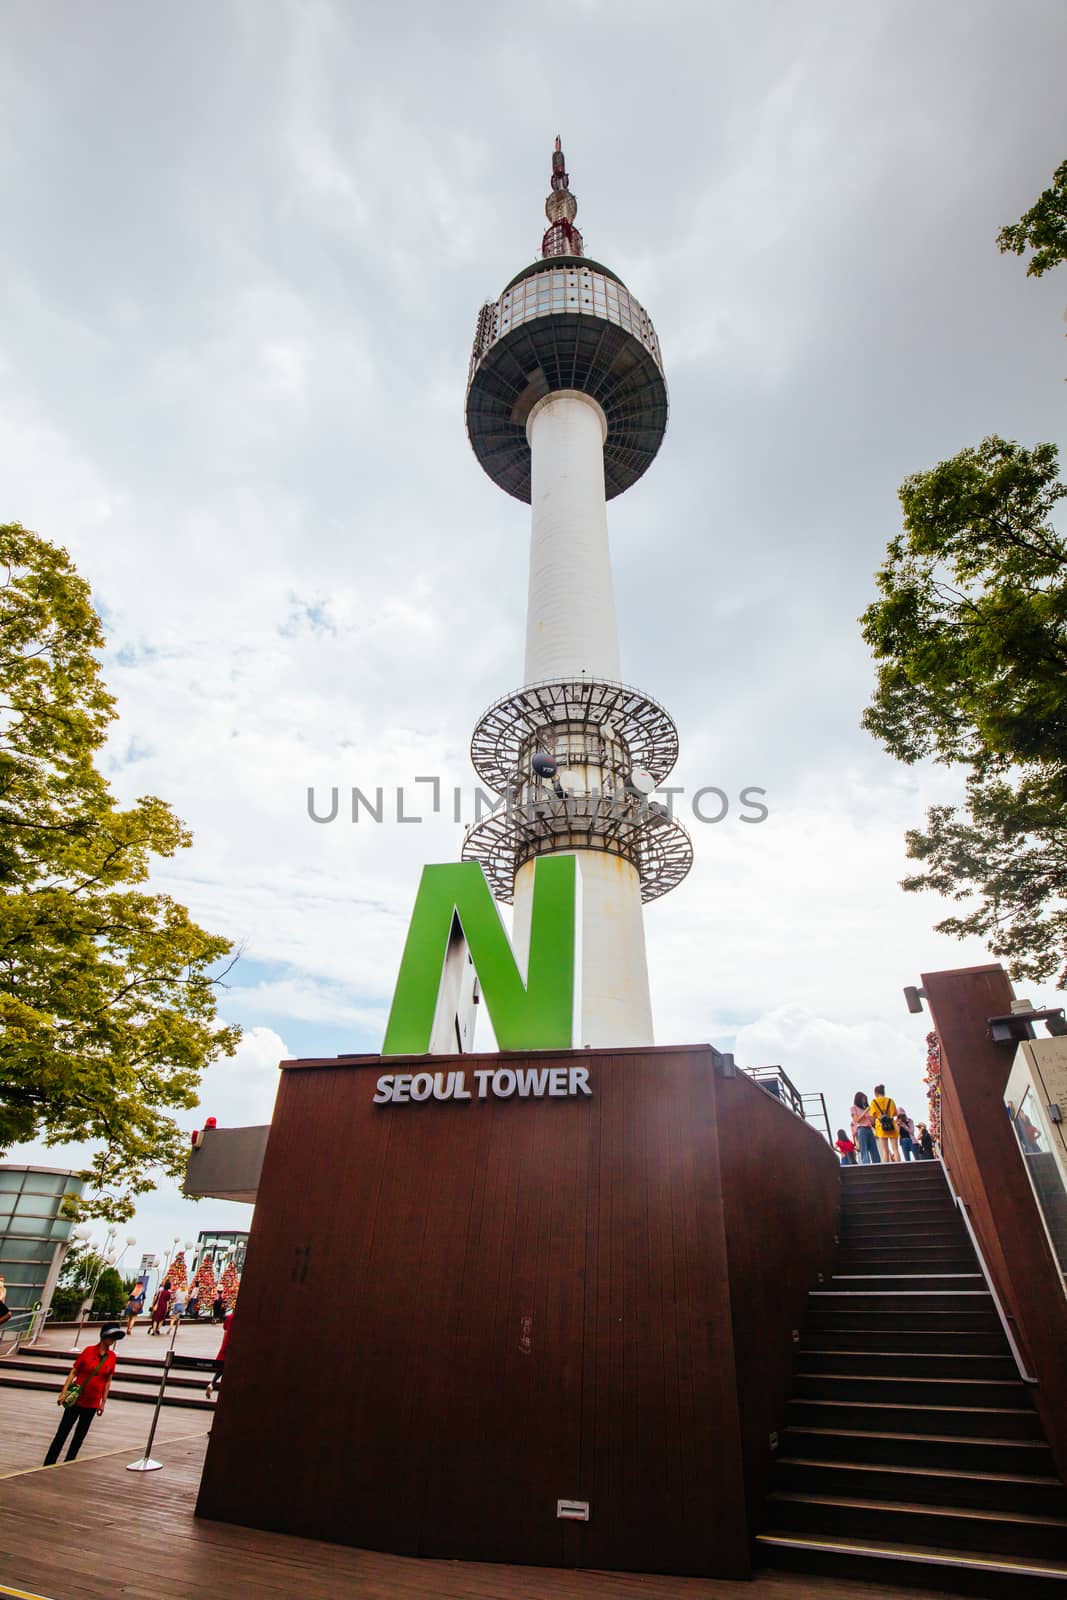 SEOUL, SOUTH KOREA - AUGUST 25, 2018: Tower and attached buildings at N Seoul Tower, Namsan Park. South Korea.